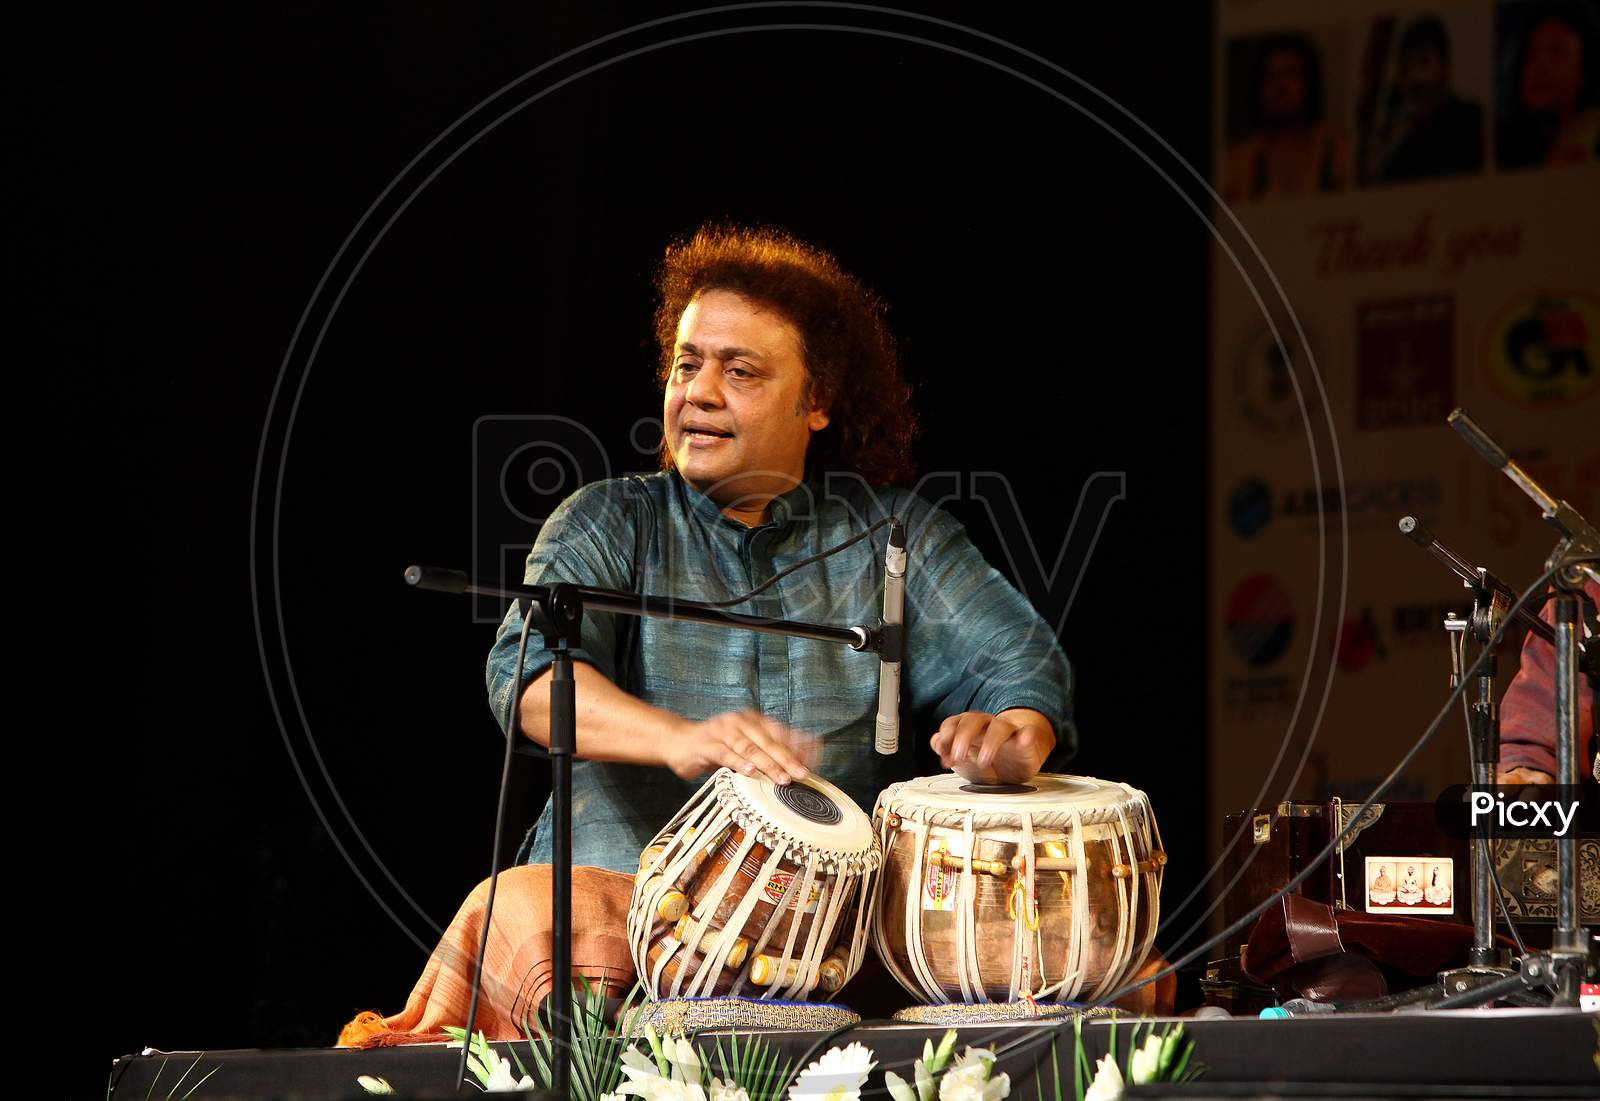 Indian Musician, Tanmoy Bose  Born 23 August 1963  Is An Indian Percussionist And Tabla Player, Musical Producer, Film Actor And Composer. He Has Collaborated With Pandit Ravi Shankar, Anoushka Shankar And Amjad Ali Khan.